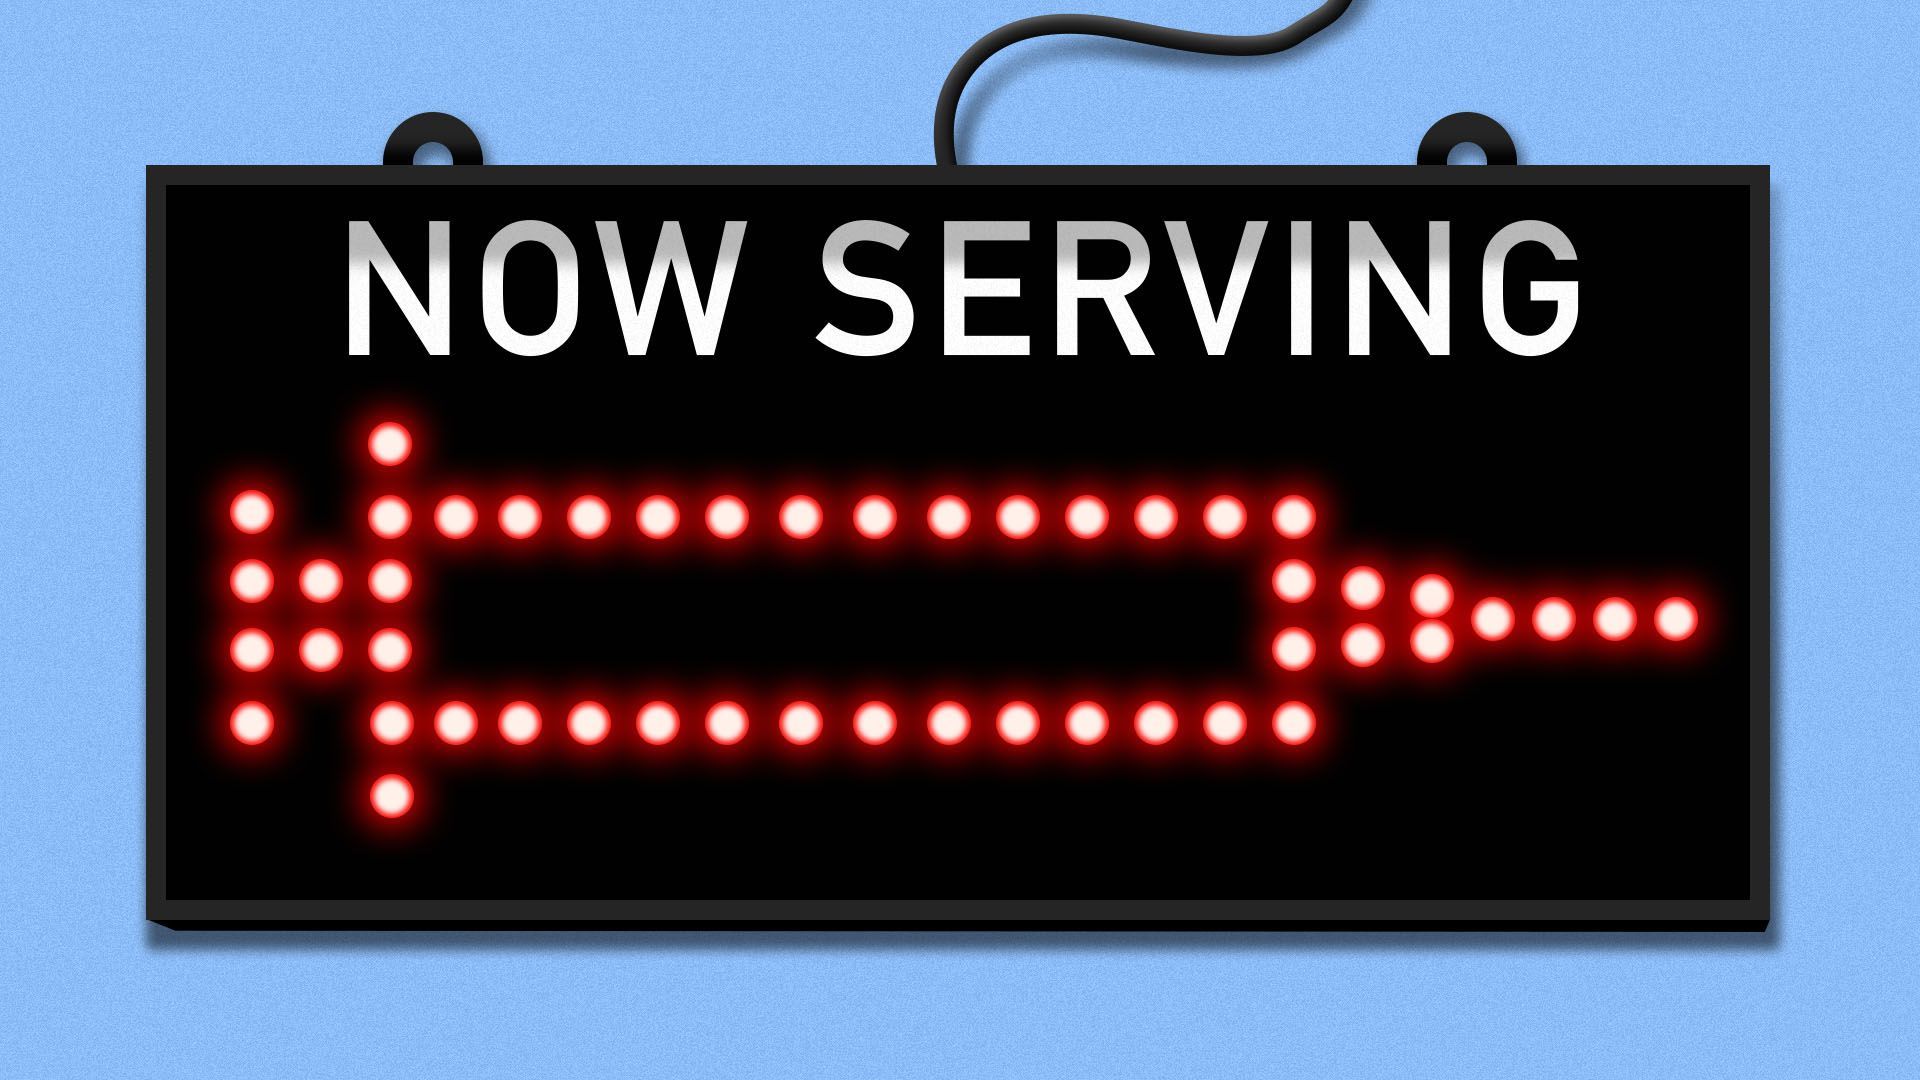 Illustration of a "now serving" sign with a lit up syringe in the center